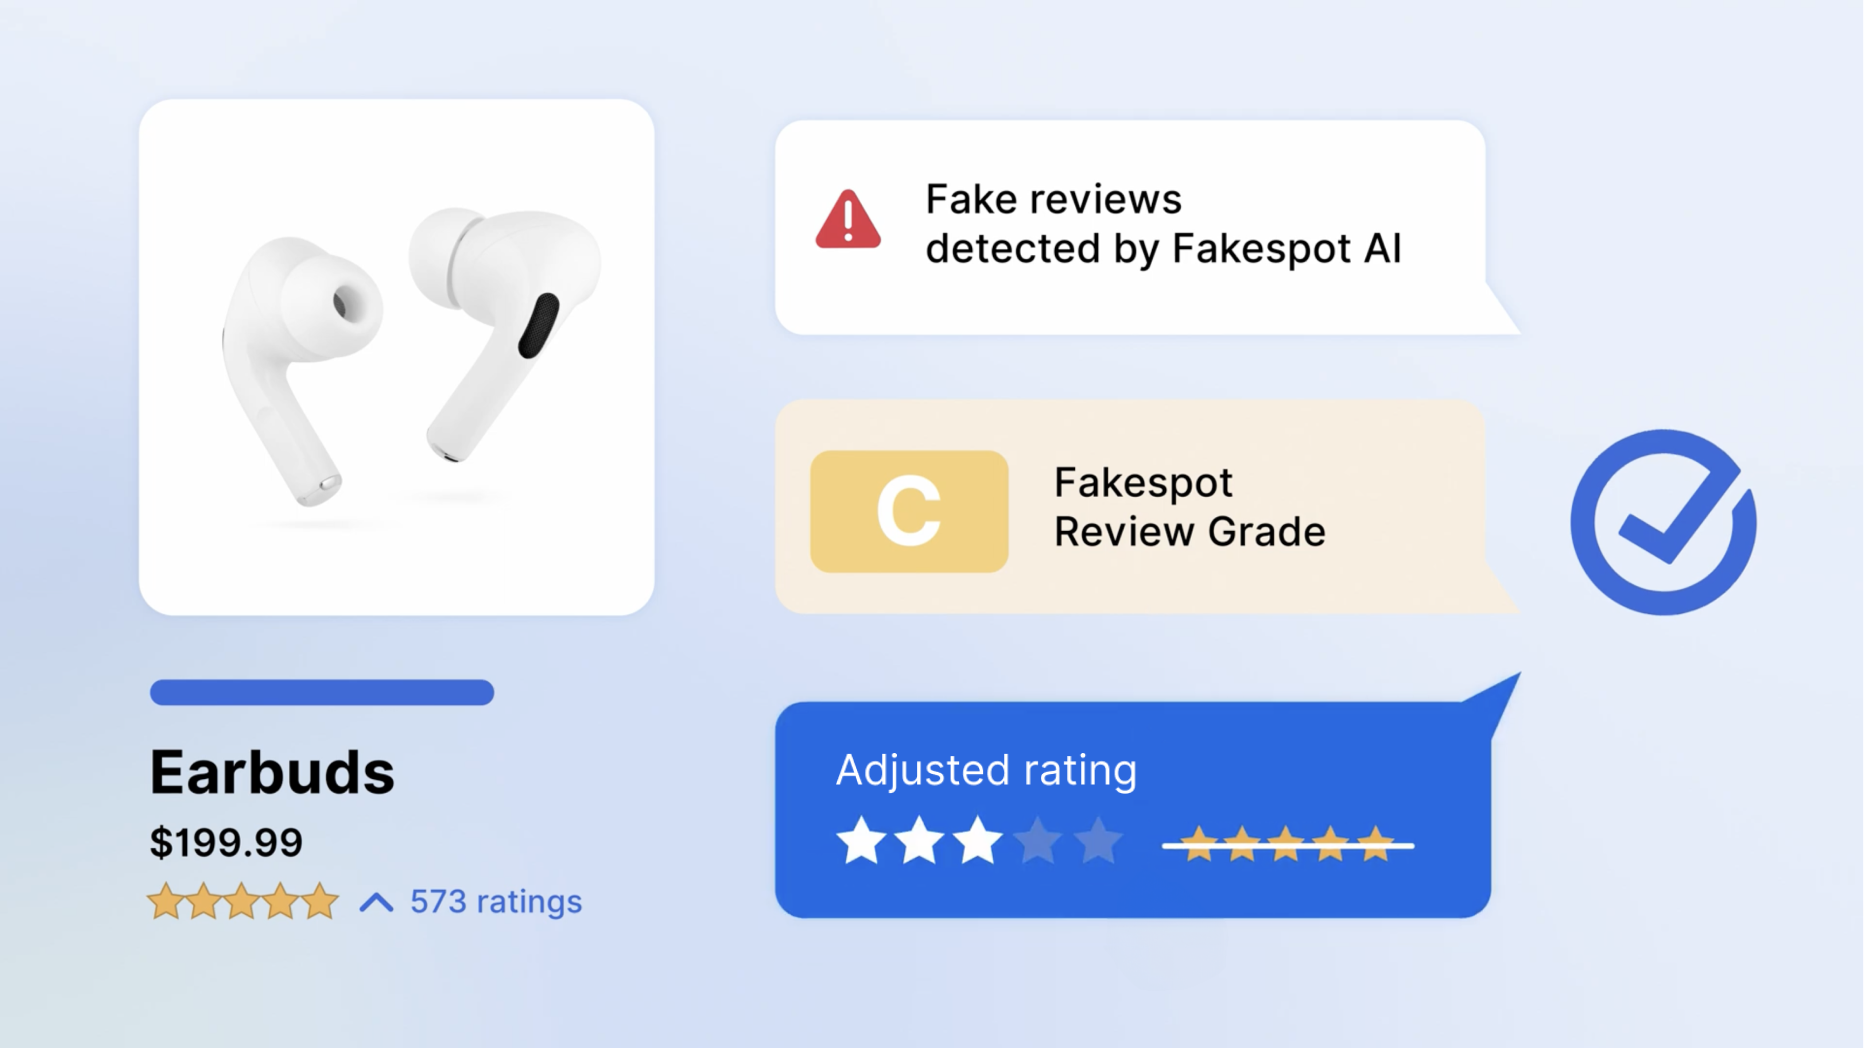 Earbuds for $199.99 with 5 stars from 573 ratings got corrected rating by Review Checker of 3 stars with Fakespot Review Grade of C, because fake reviews detected by Fakespot AI